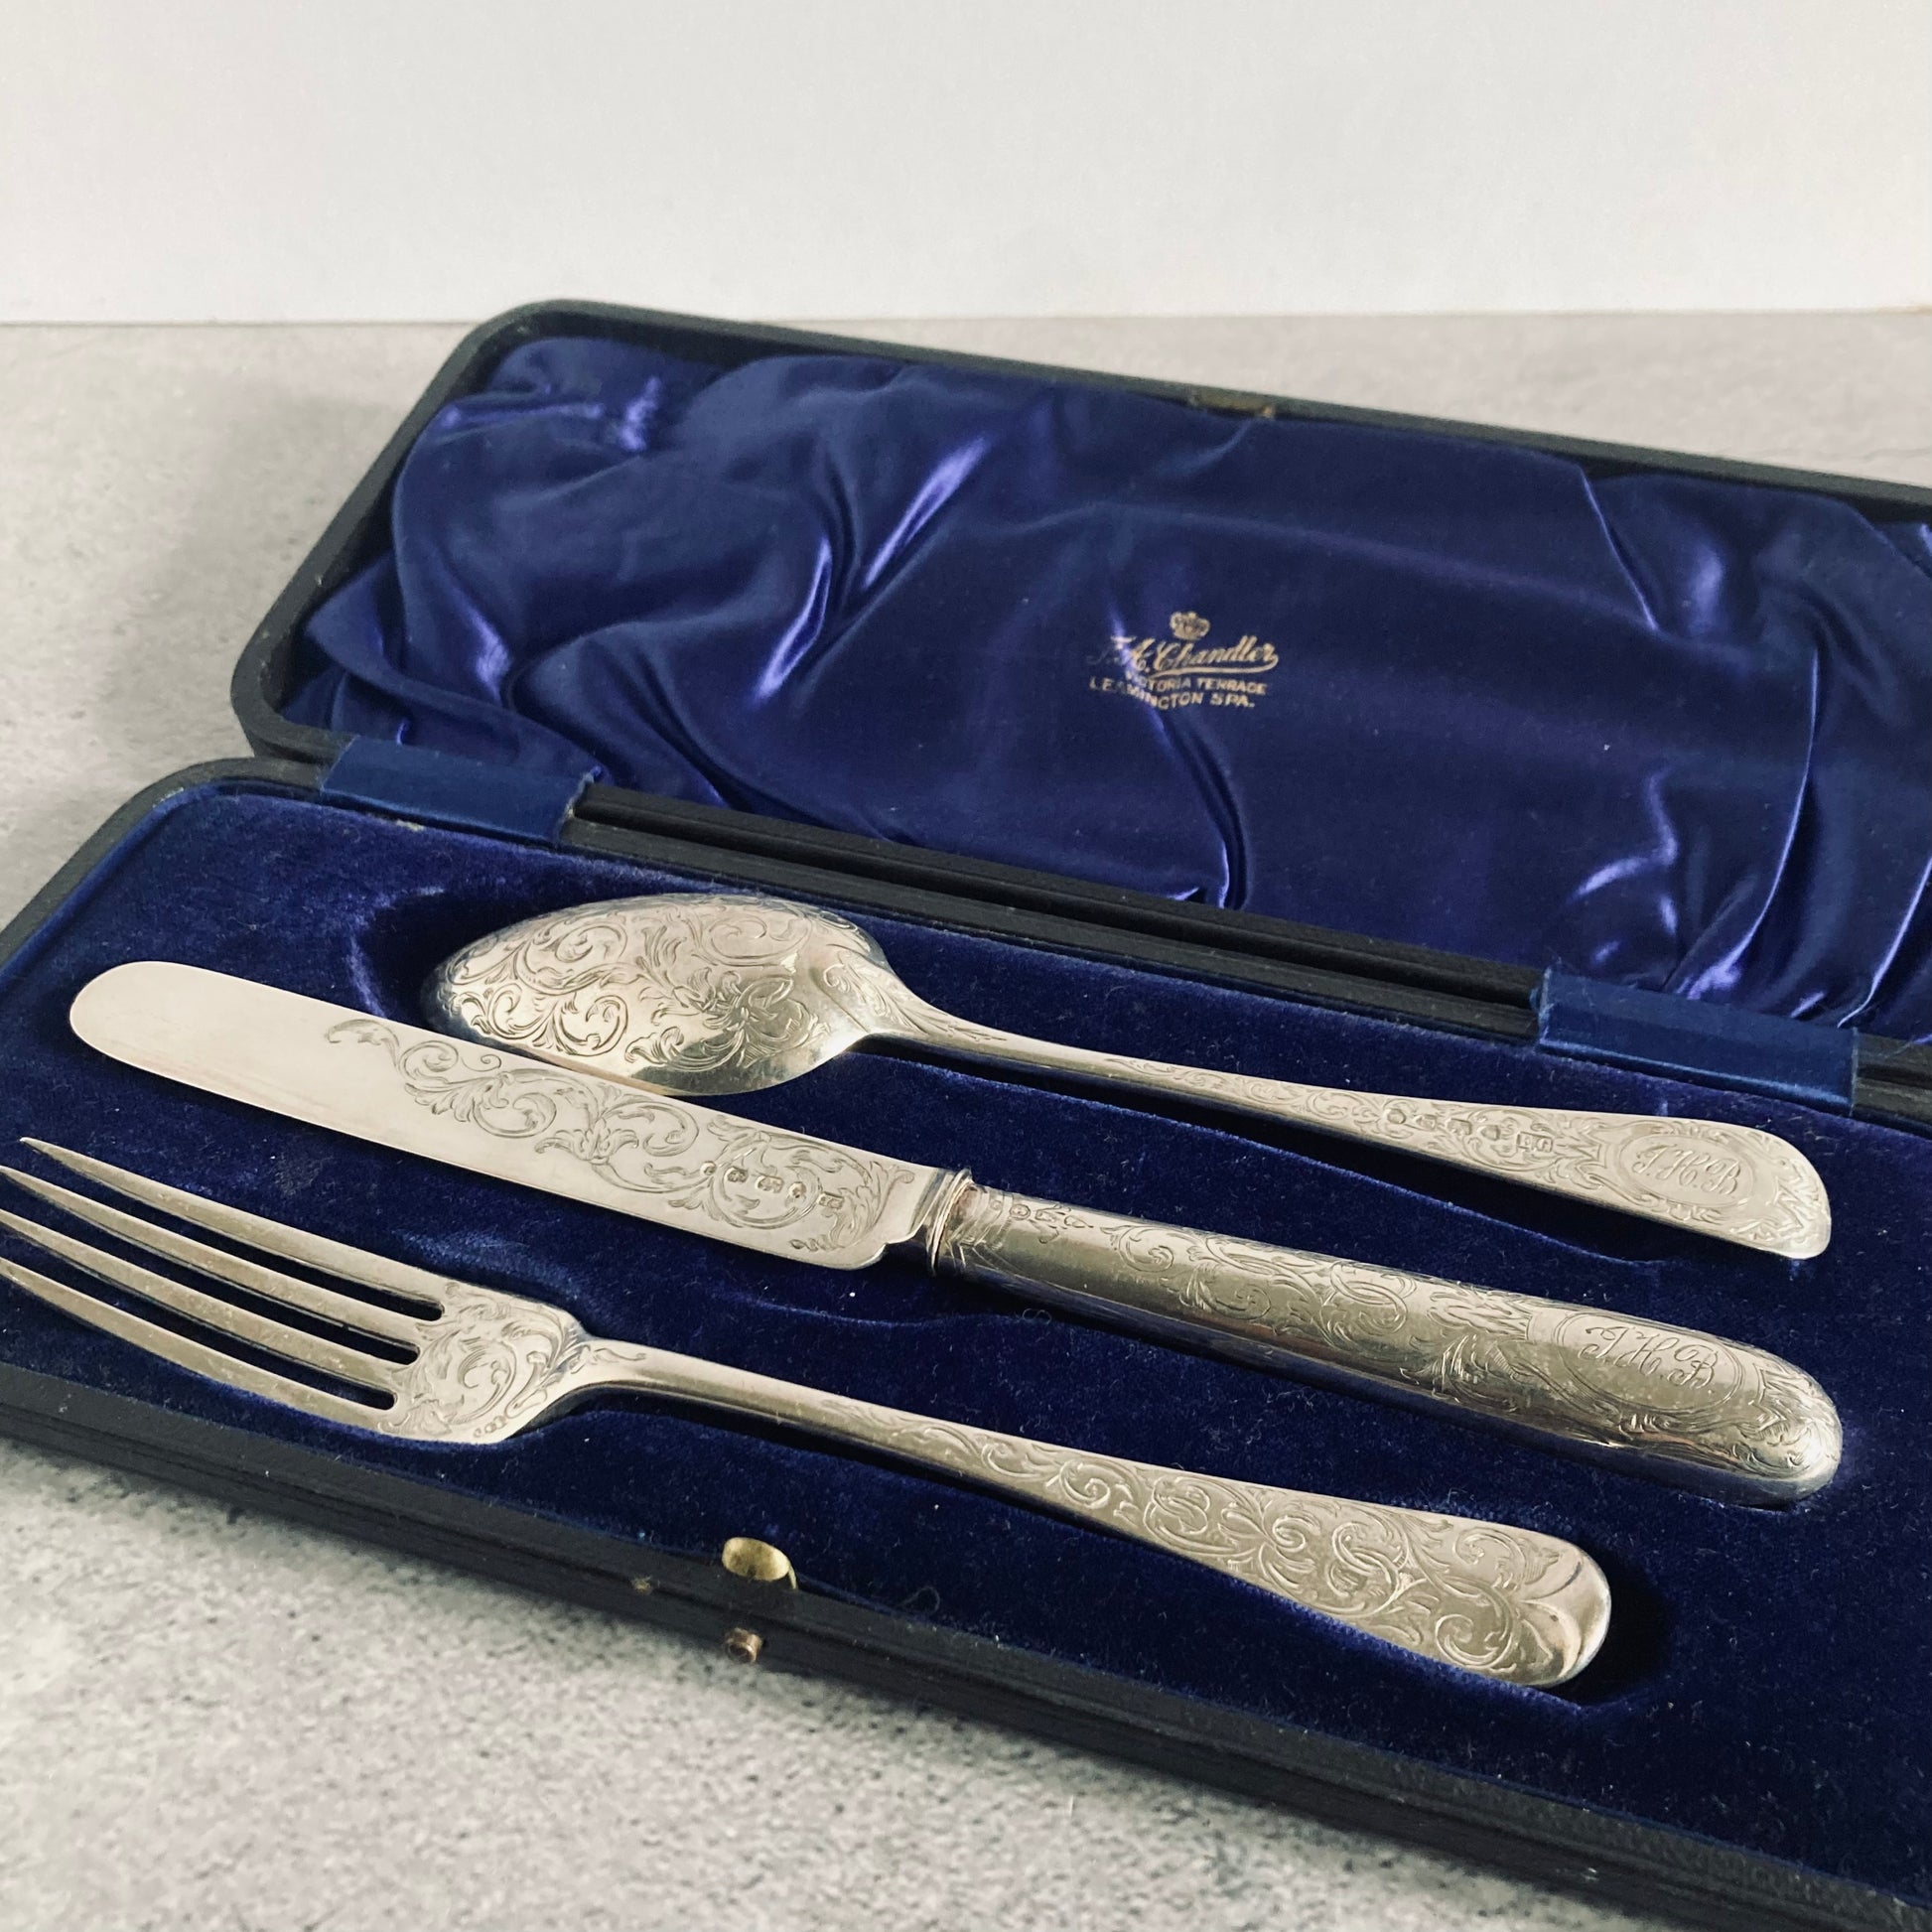 Antique Infant Spoon and Fork Cutlery Set | Silver Christening Set 1880